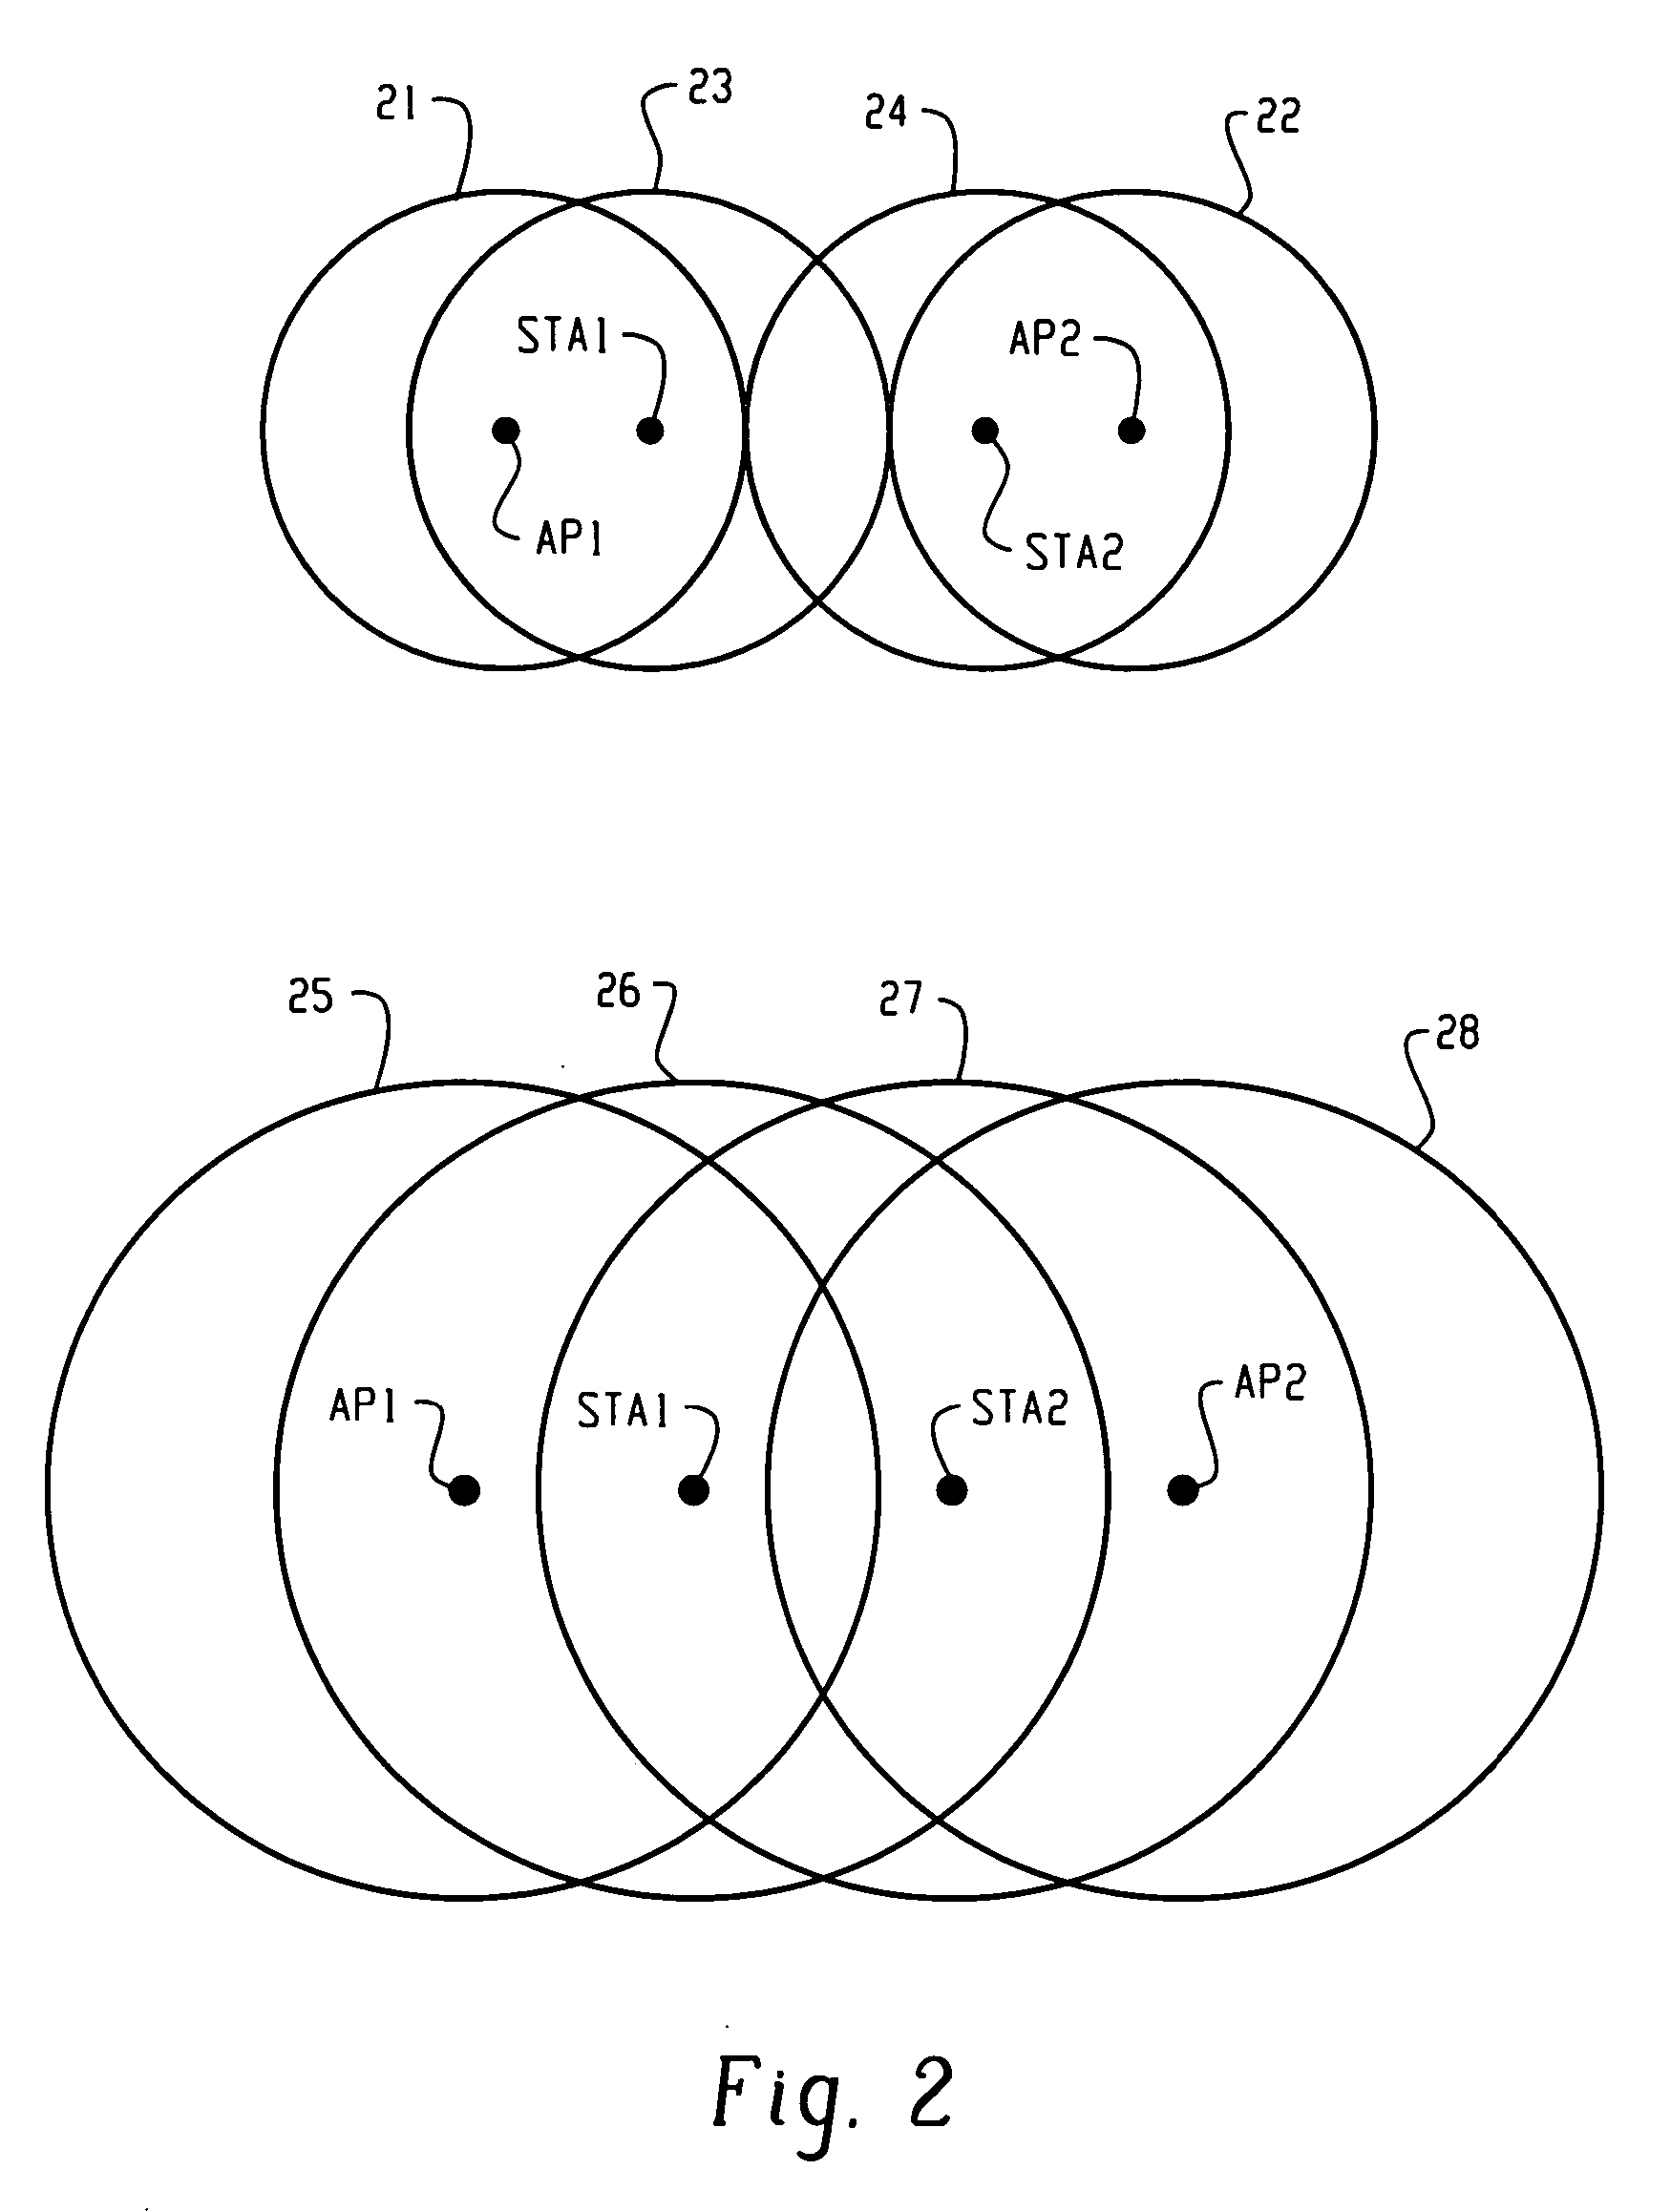 Method and apparatus for improving performance in wireless networks by tuning receiver sensitivity thresholds